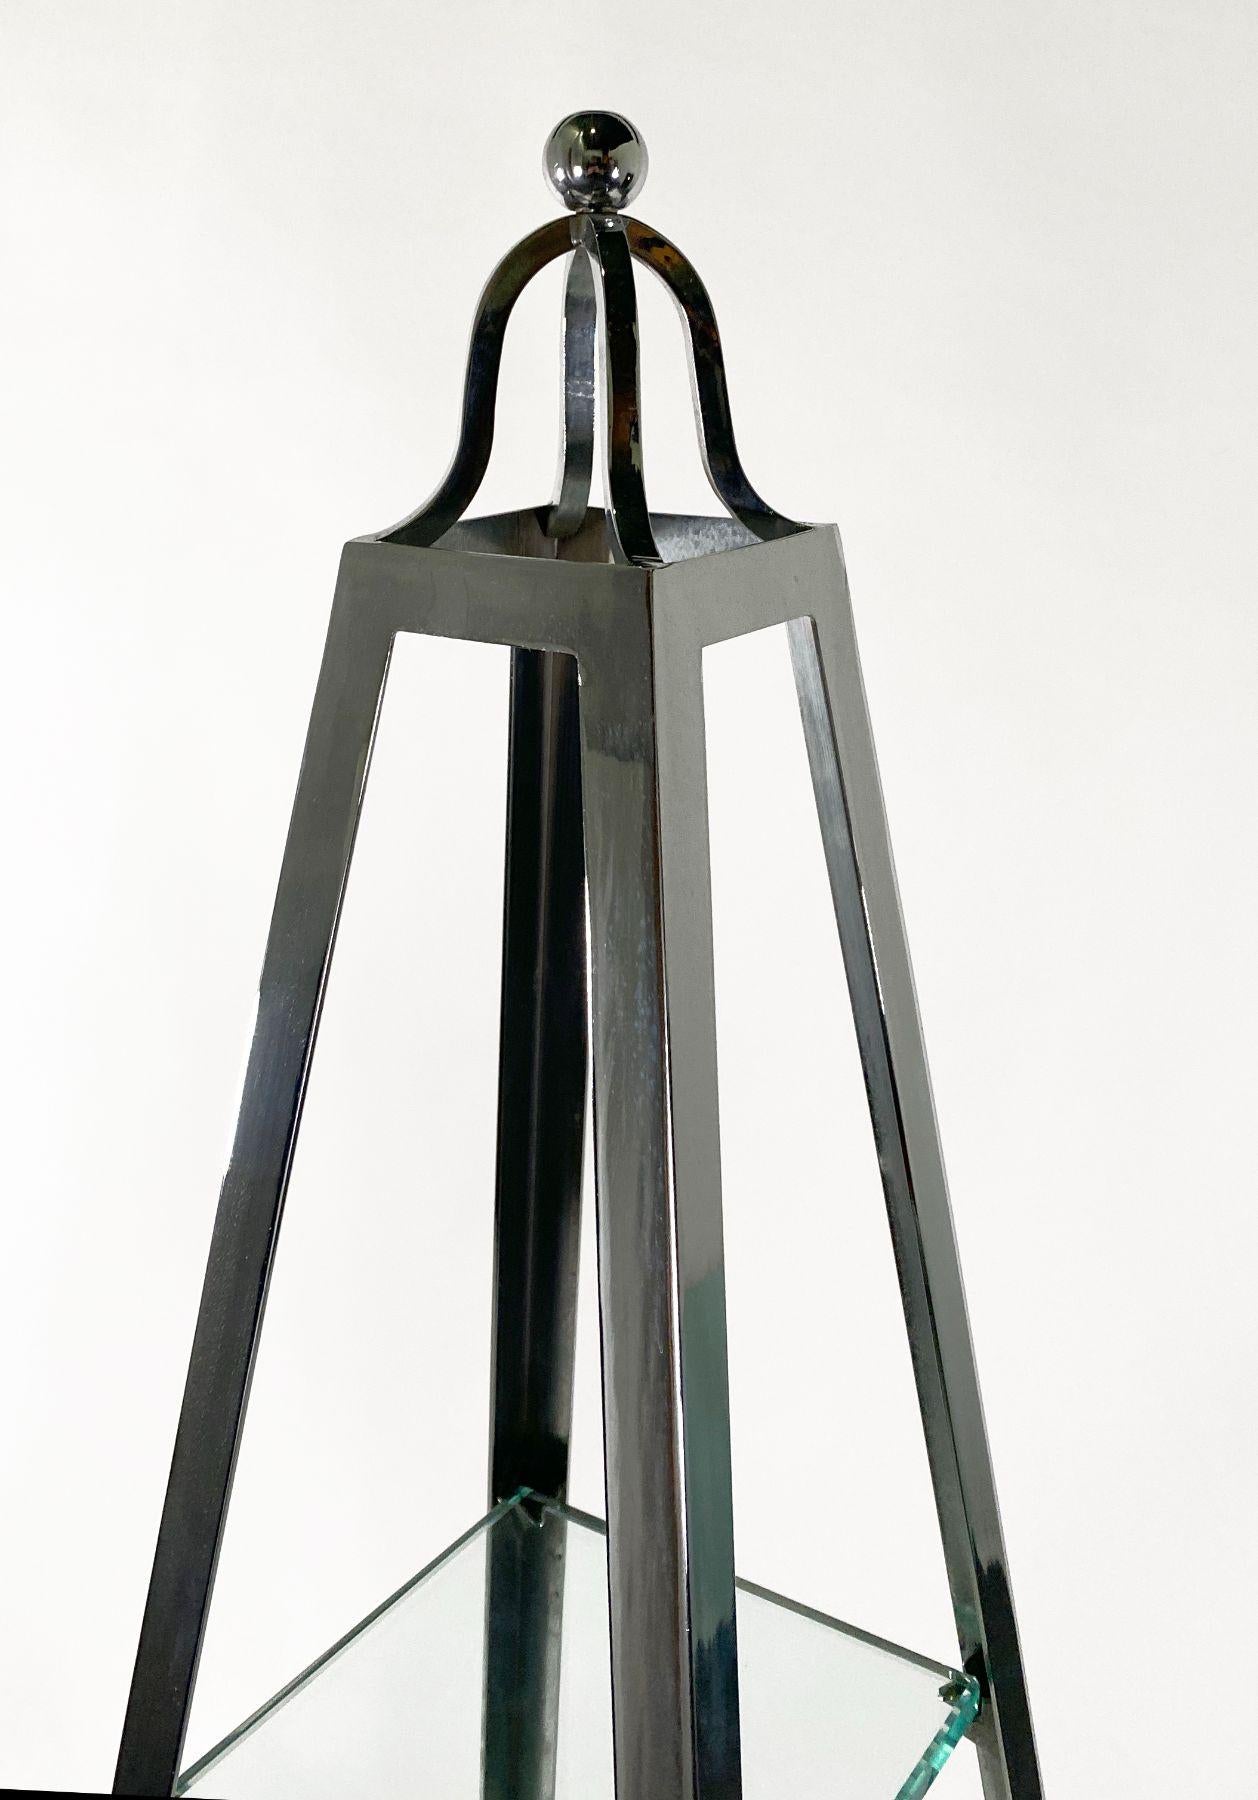 Of typical obelisk form with graduating glass shelves for display starting from a few inches below the top point, to the base.